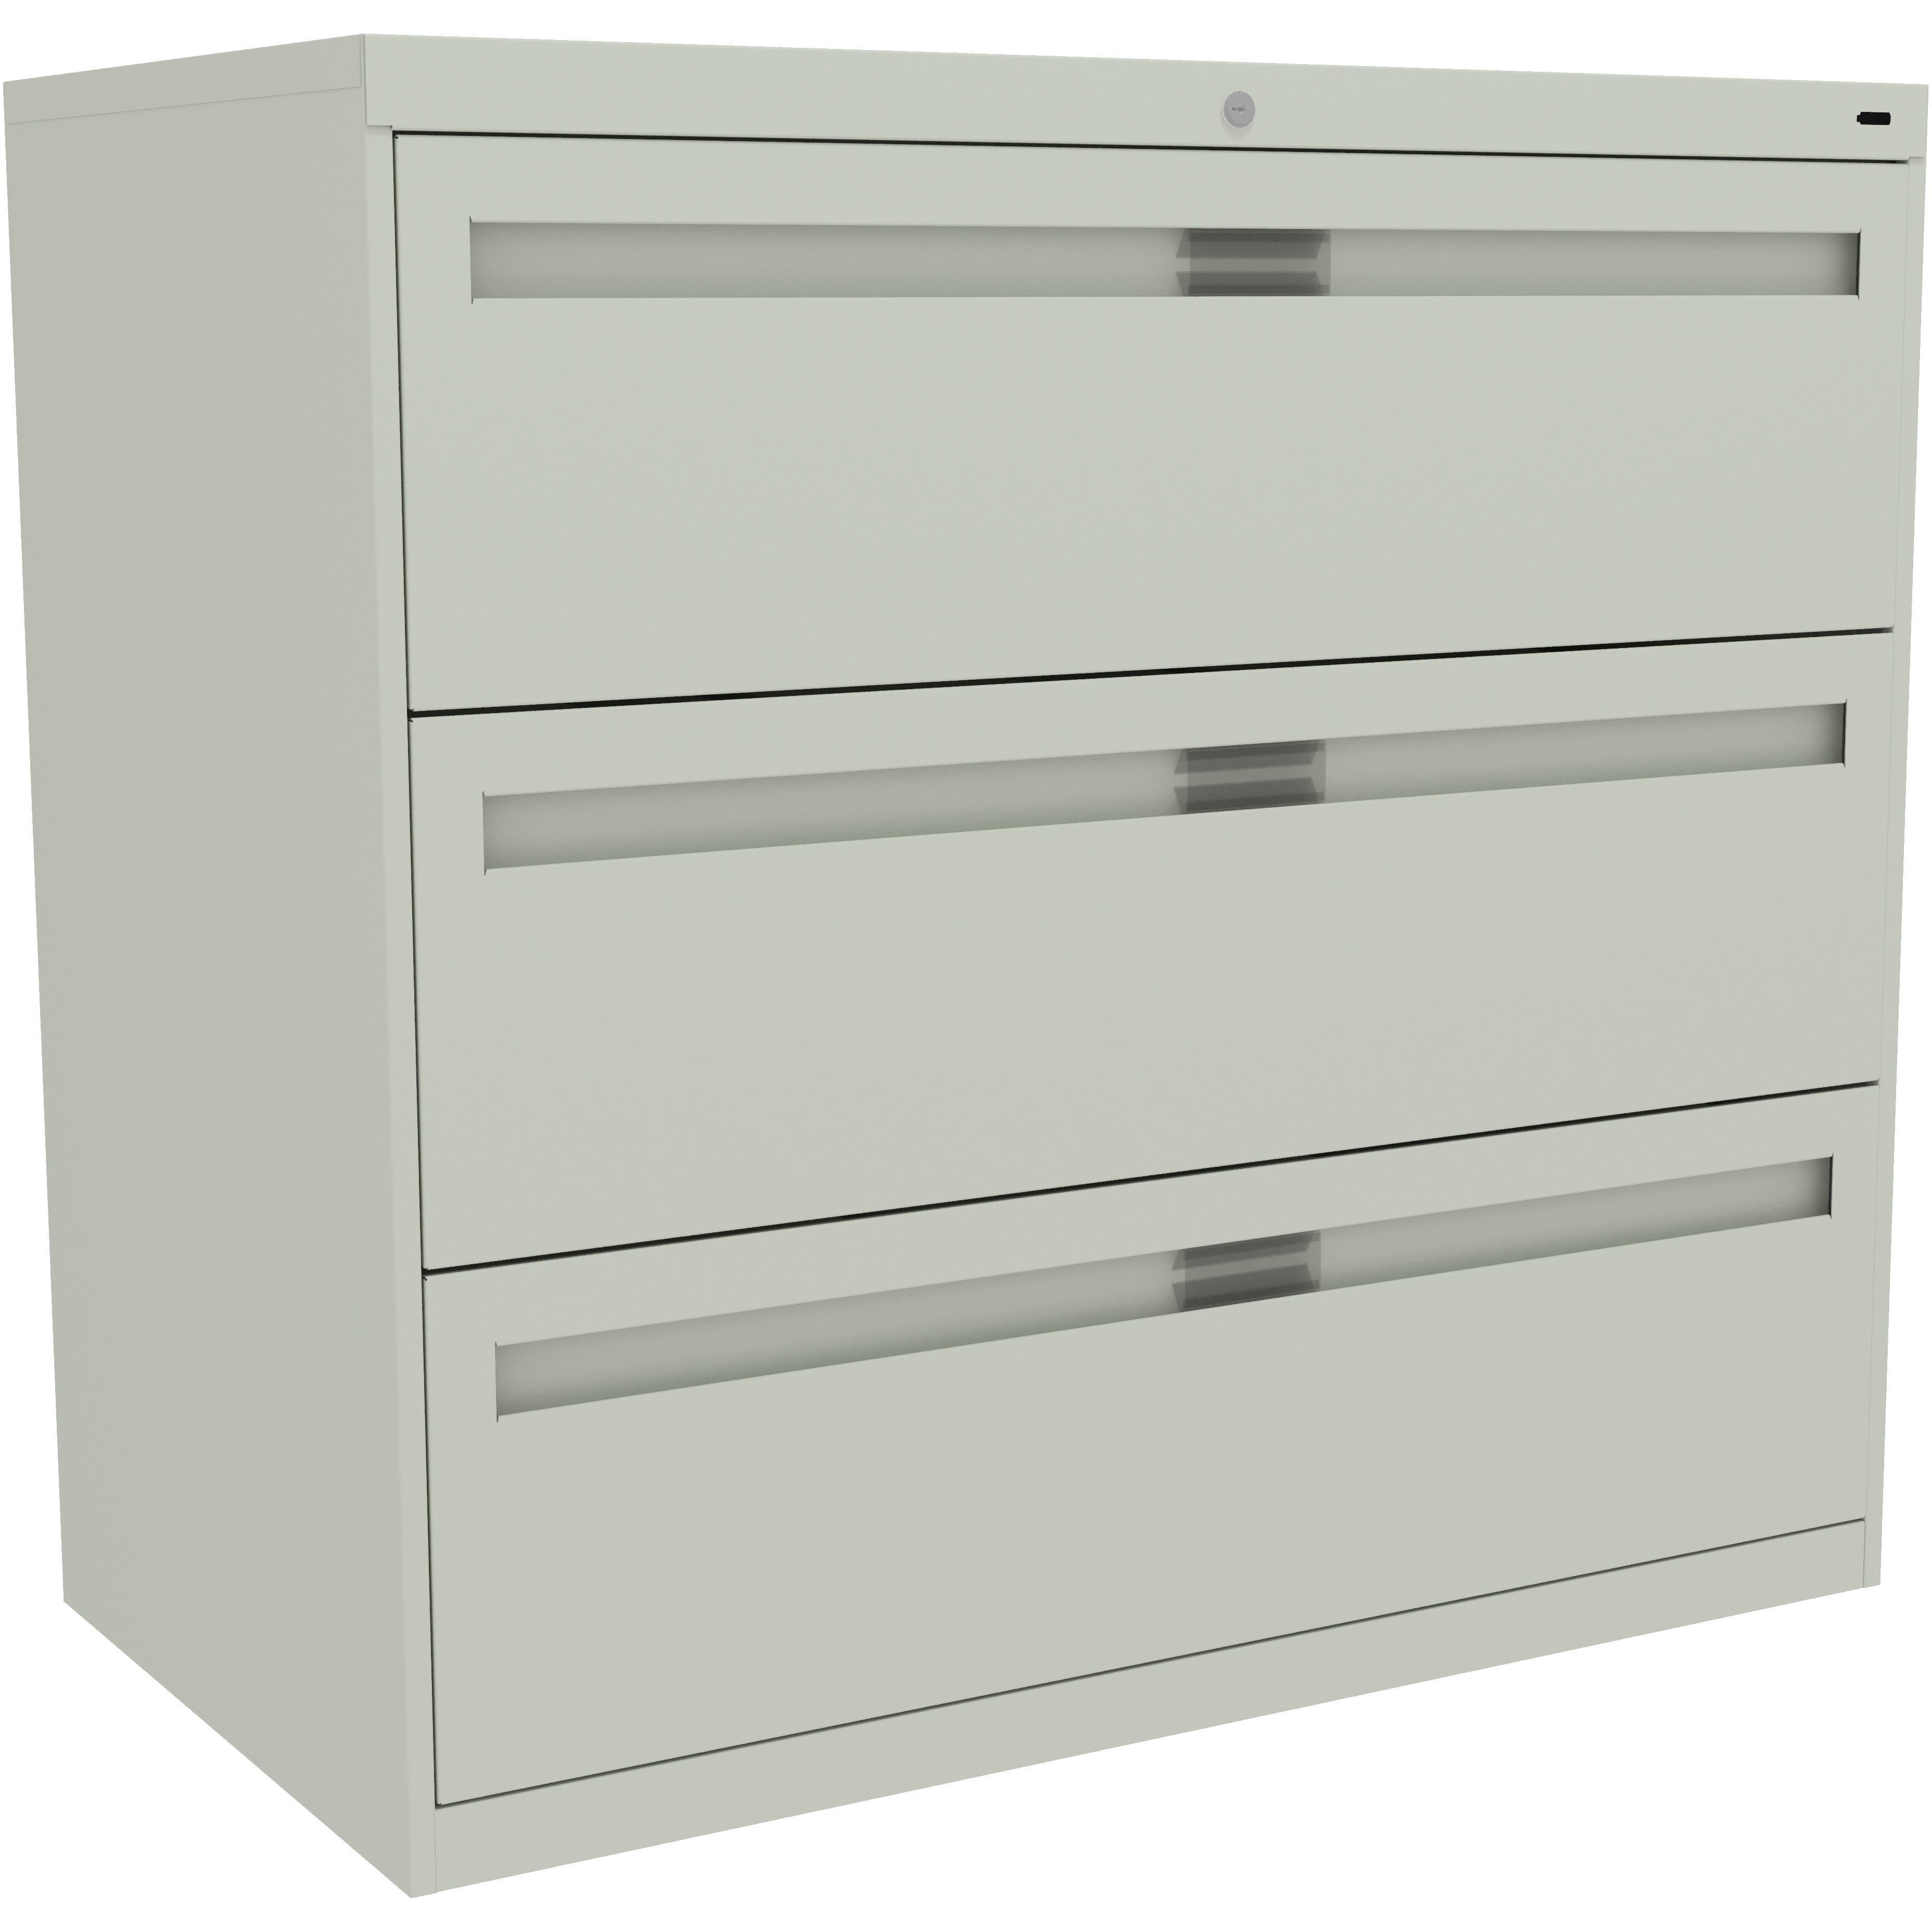 Tennsco 42" Wide Three-Drawer Lateral File with Retractable Doors, LPL4236L31